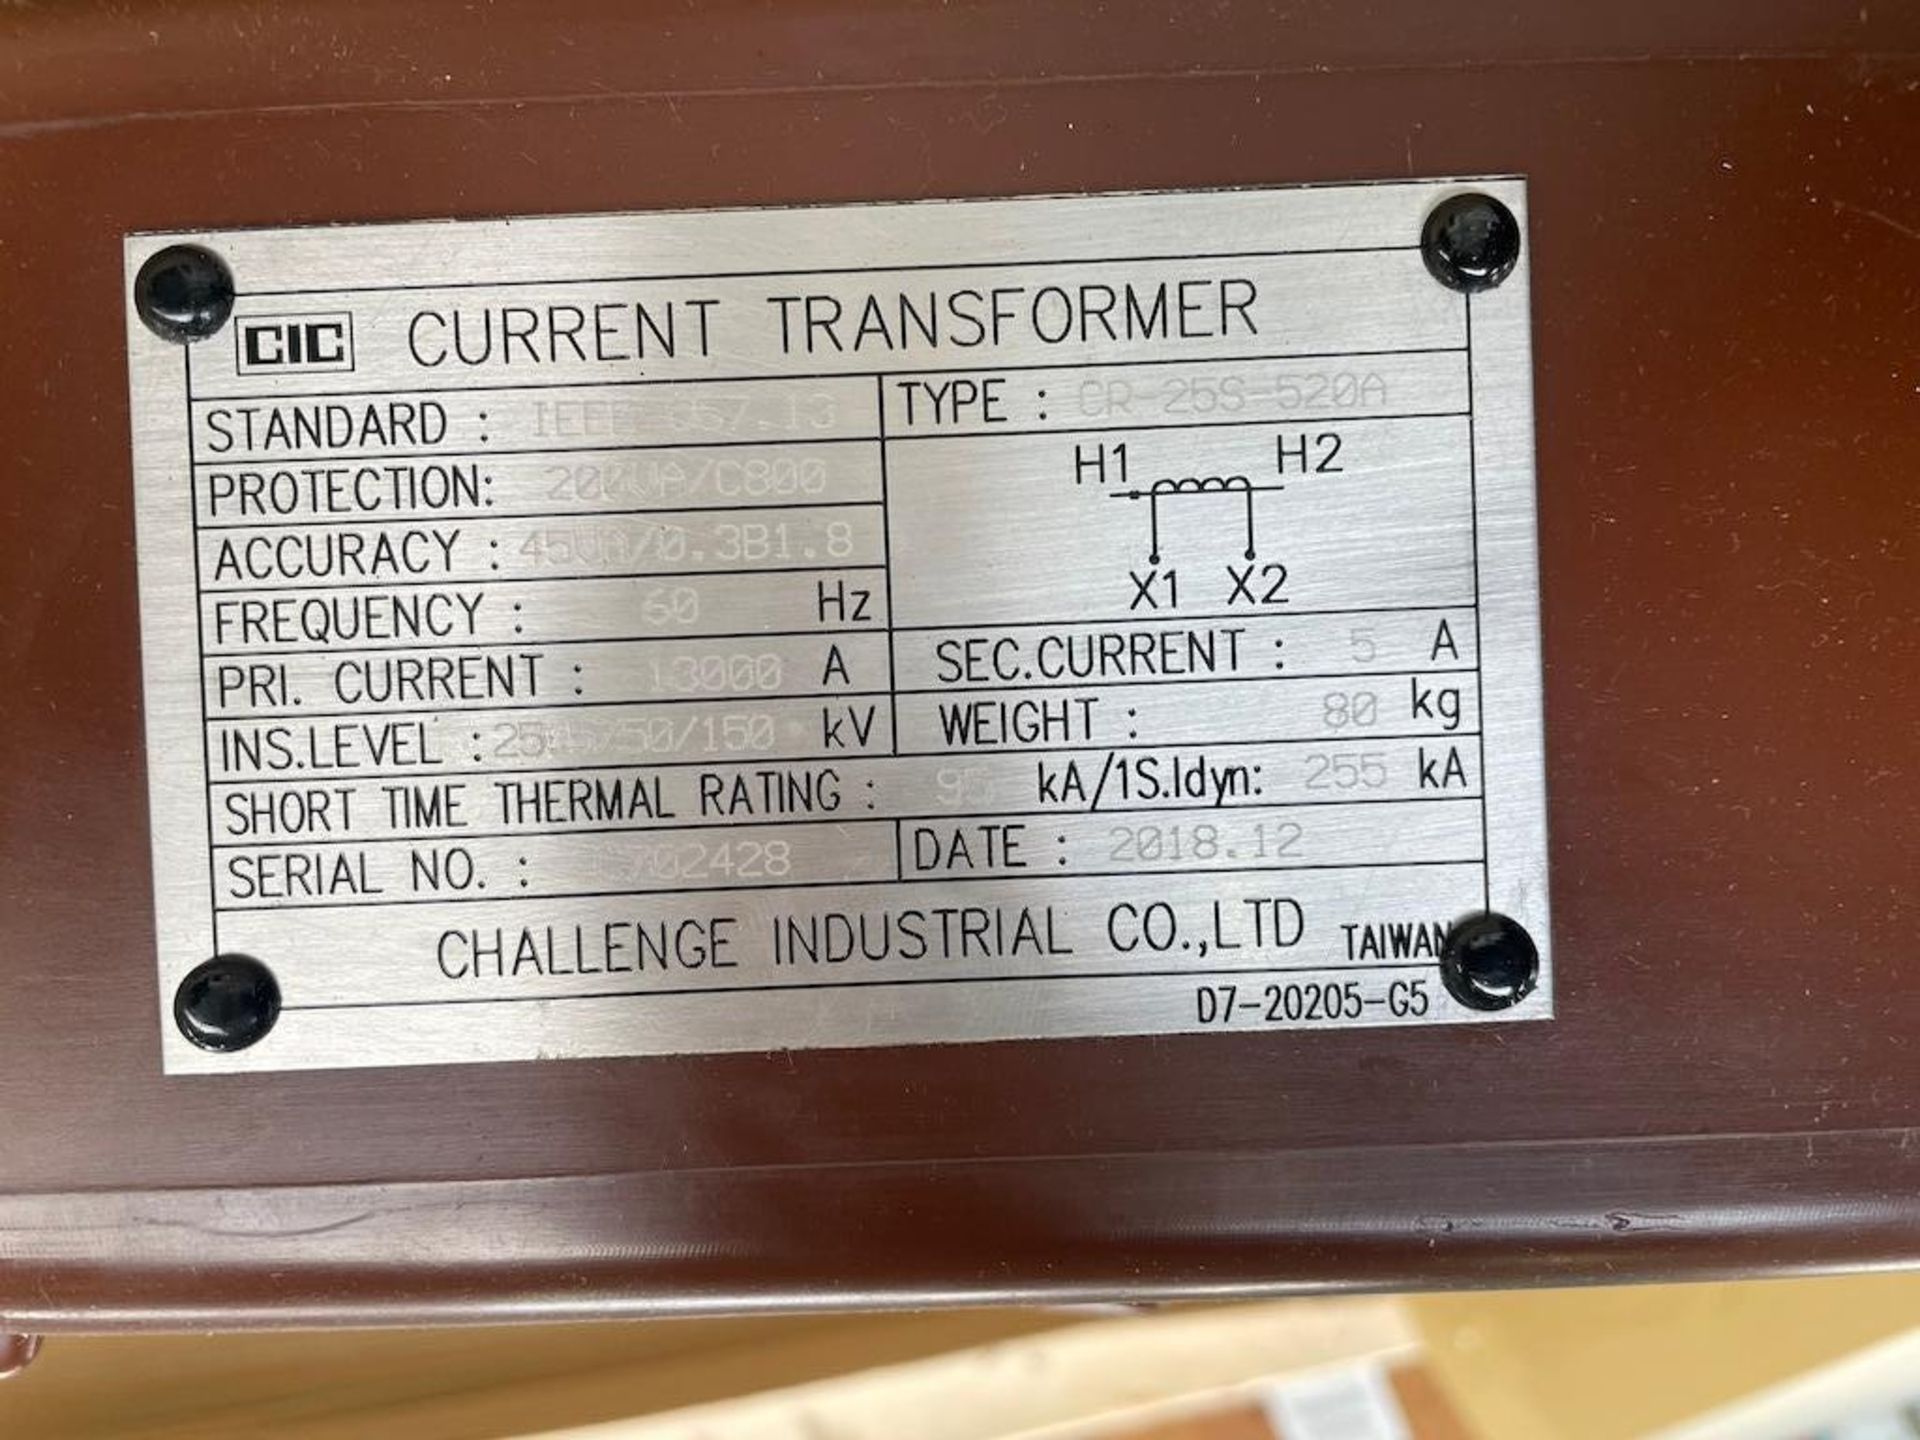 LOT (46) PCS OF 2018 CHALLENGE INDUSTRIAL CURRENT TRANSFORMERS, TYPE CR-25S-520A, STANDARD 1EEE C57. - Image 3 of 7